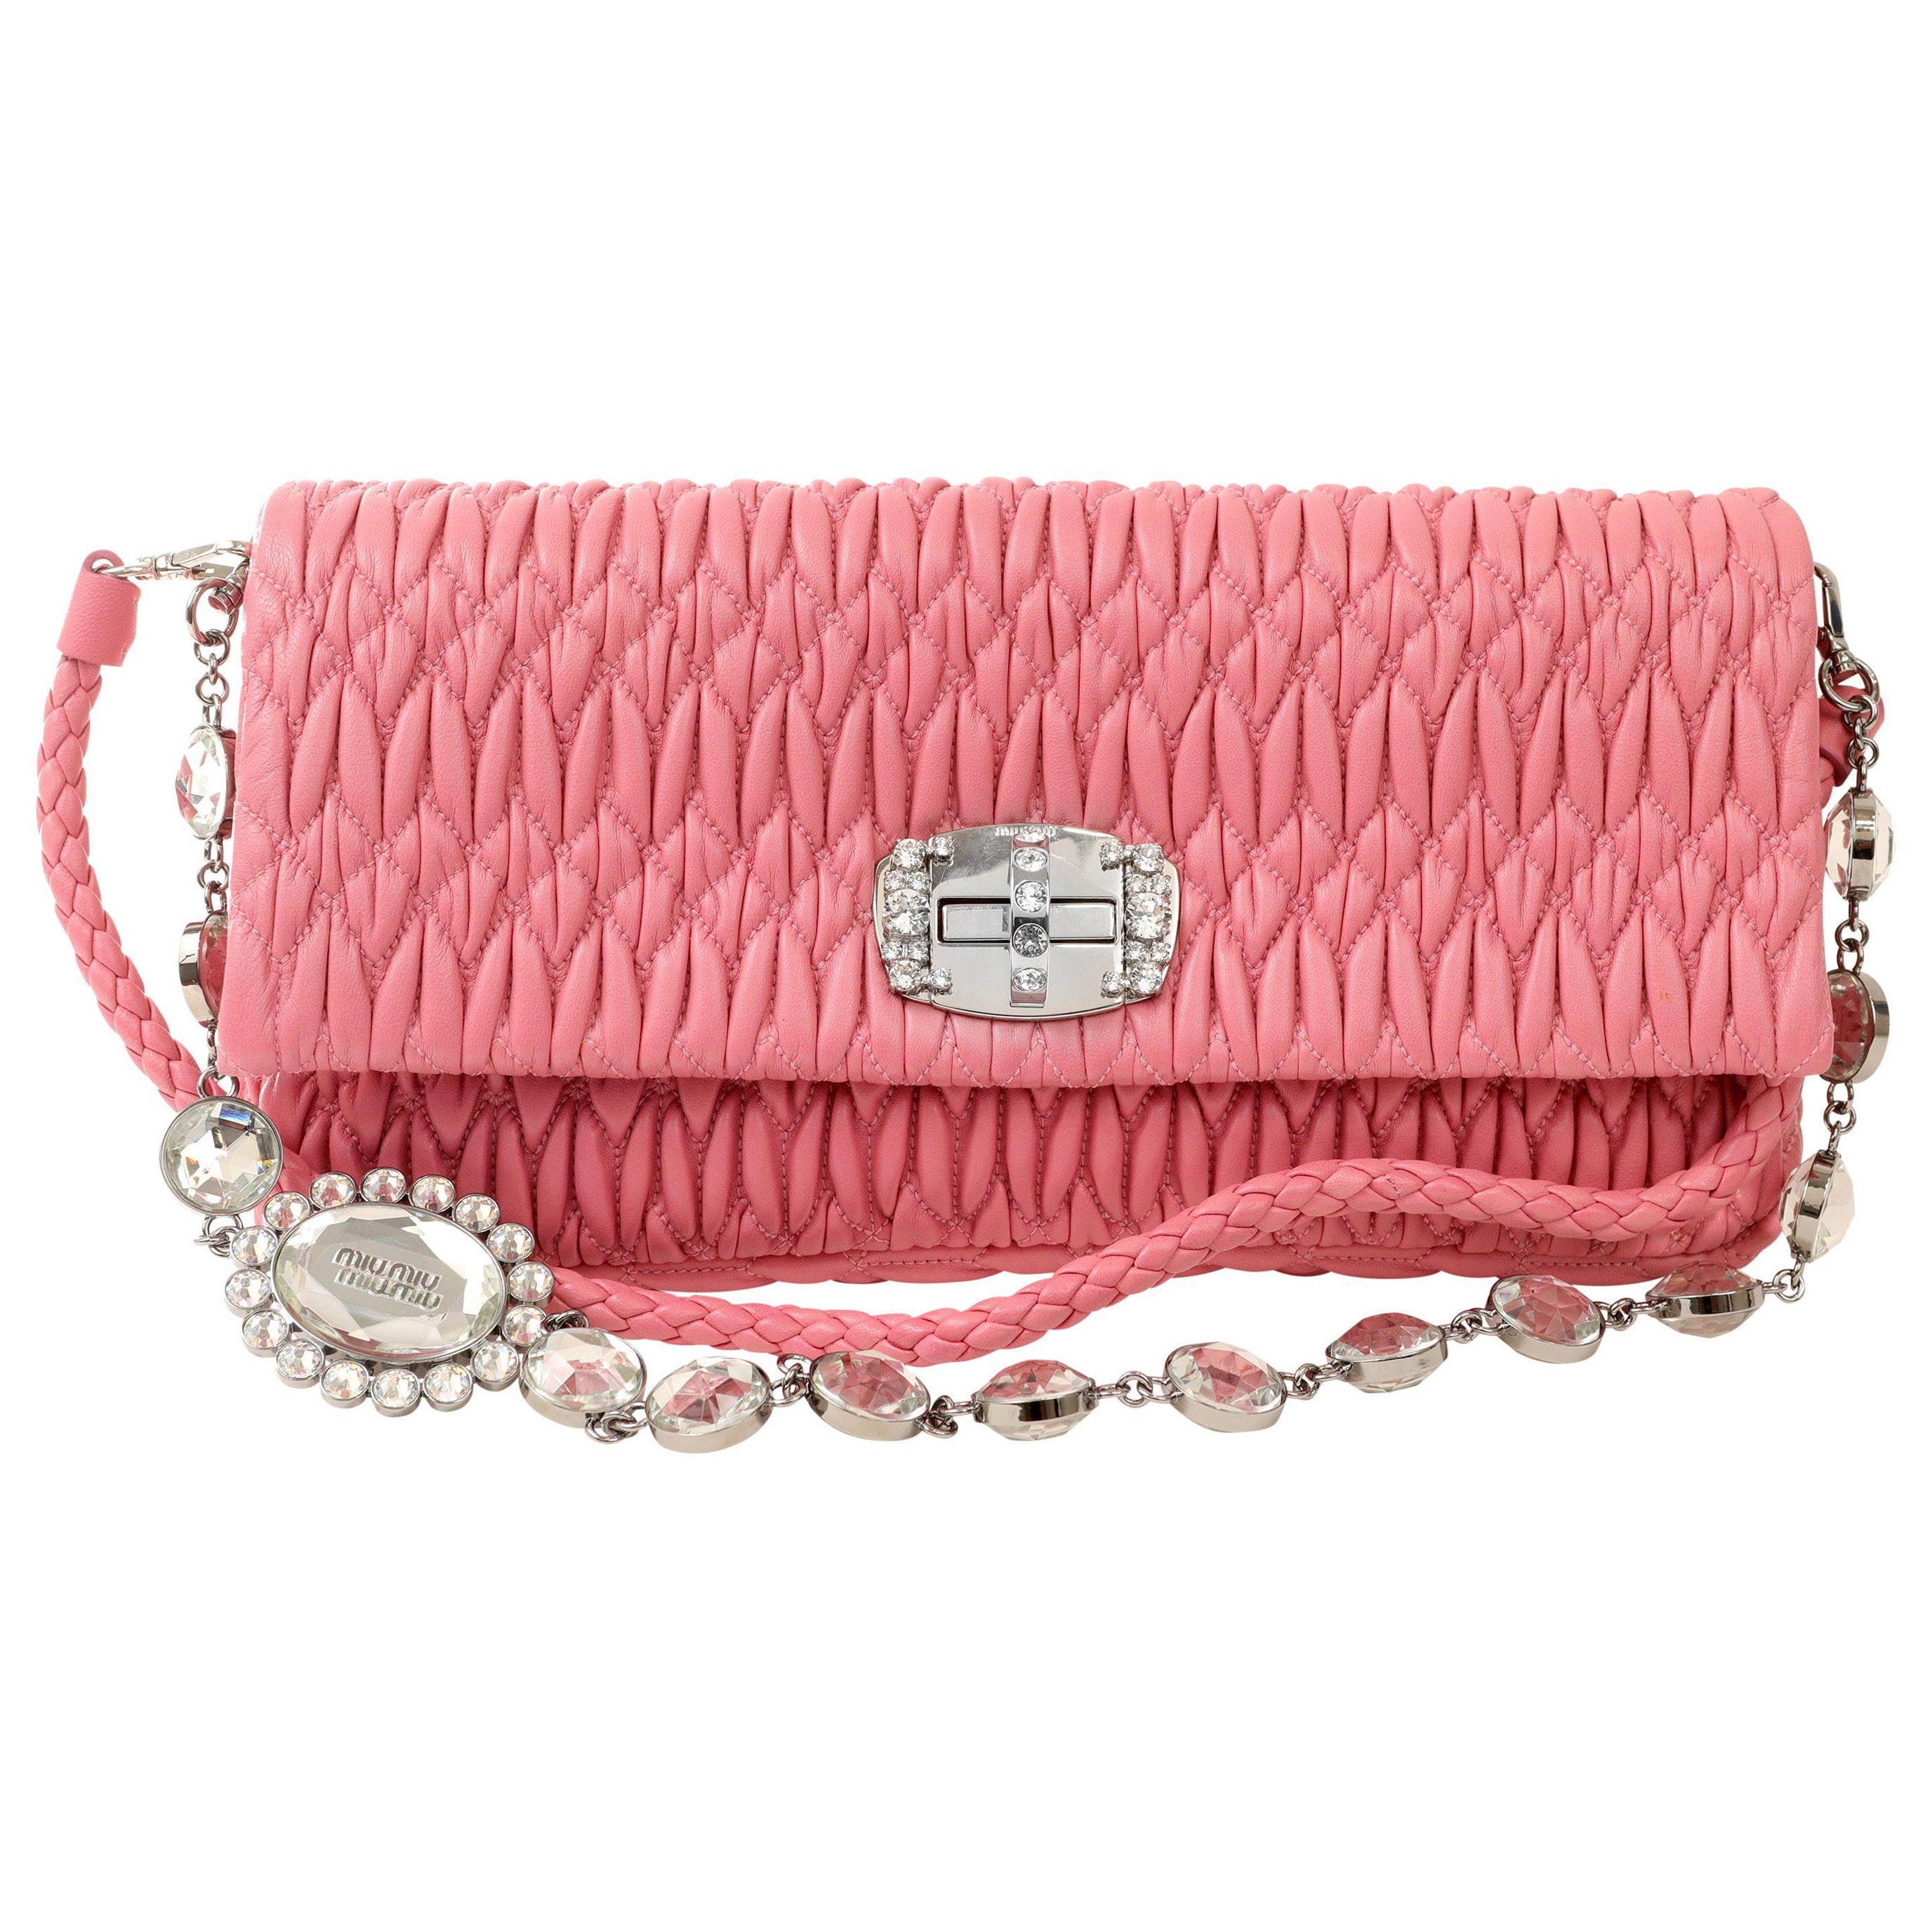 Miu Miu Rose Pink Iconic Crystal Cloquè Small Bag with Silver Hardware For Sale